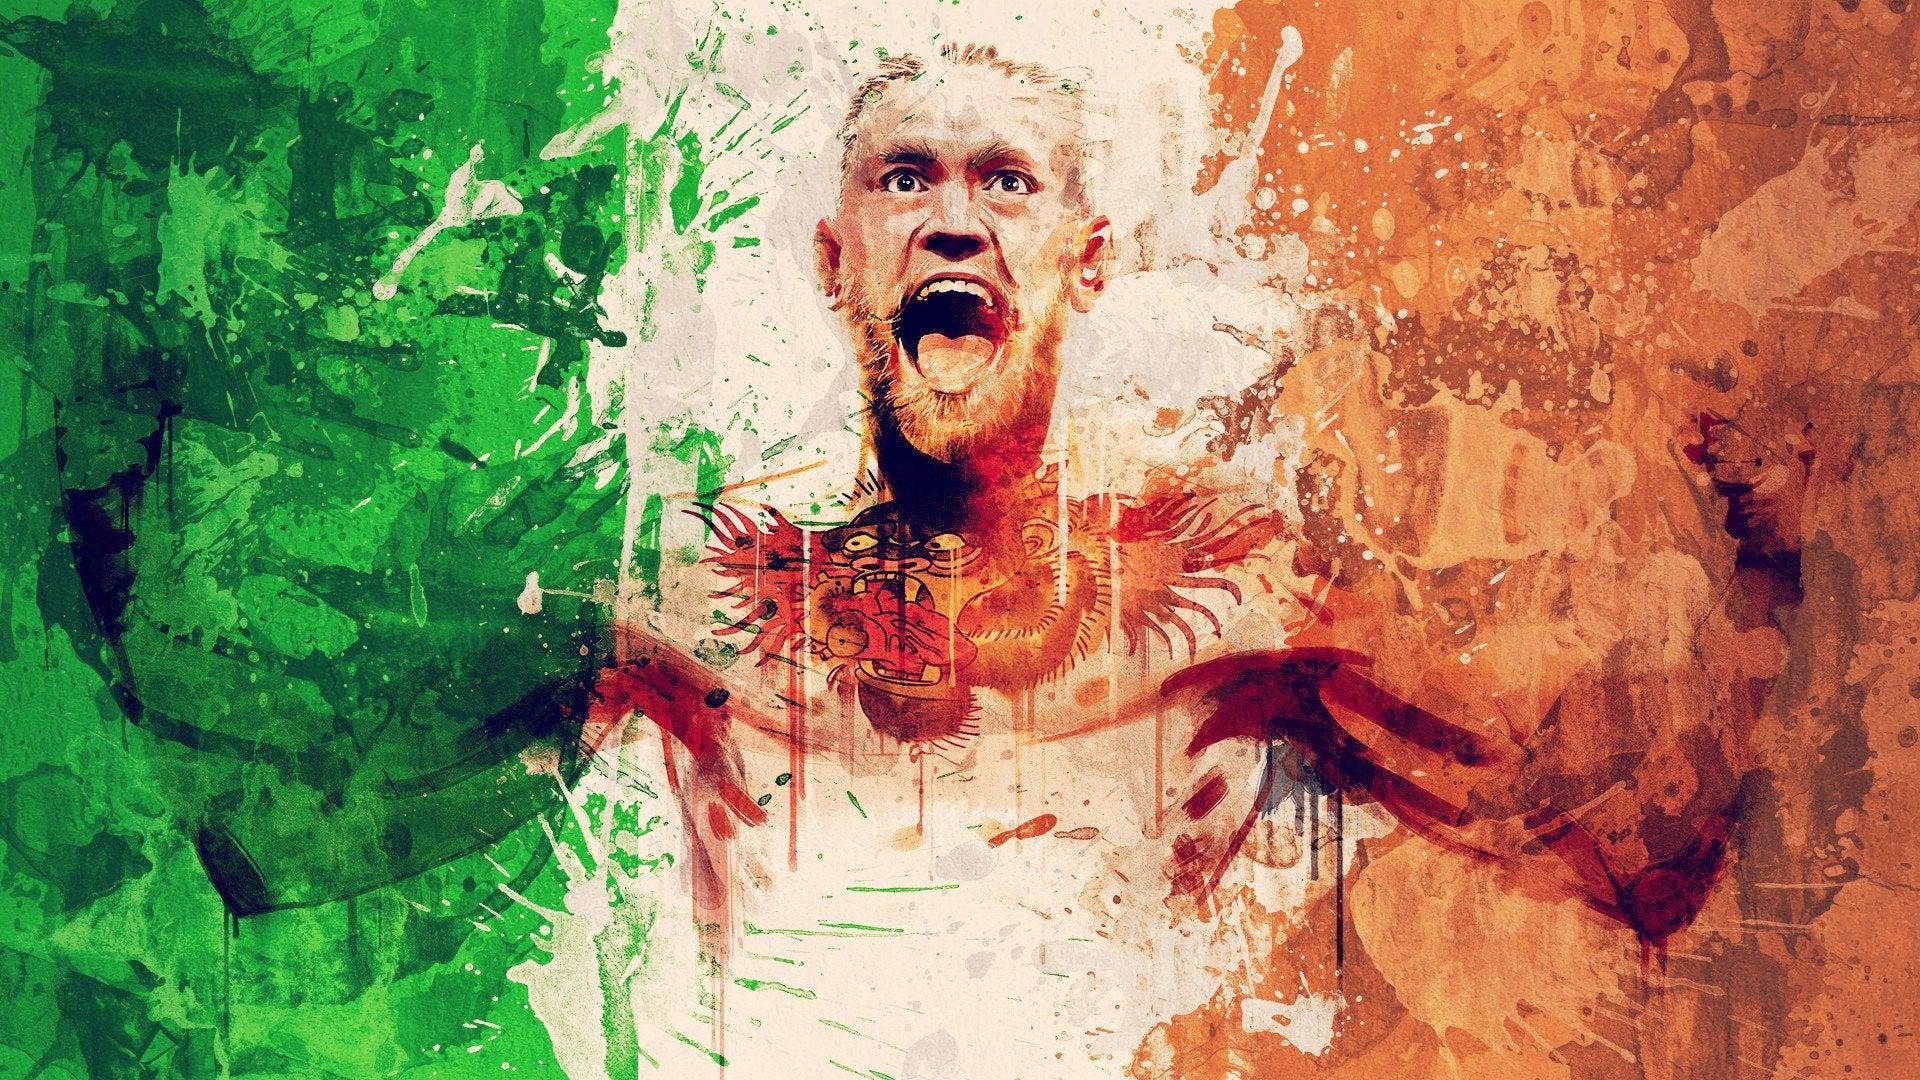 Wallpaper I just made of Conor McGregor